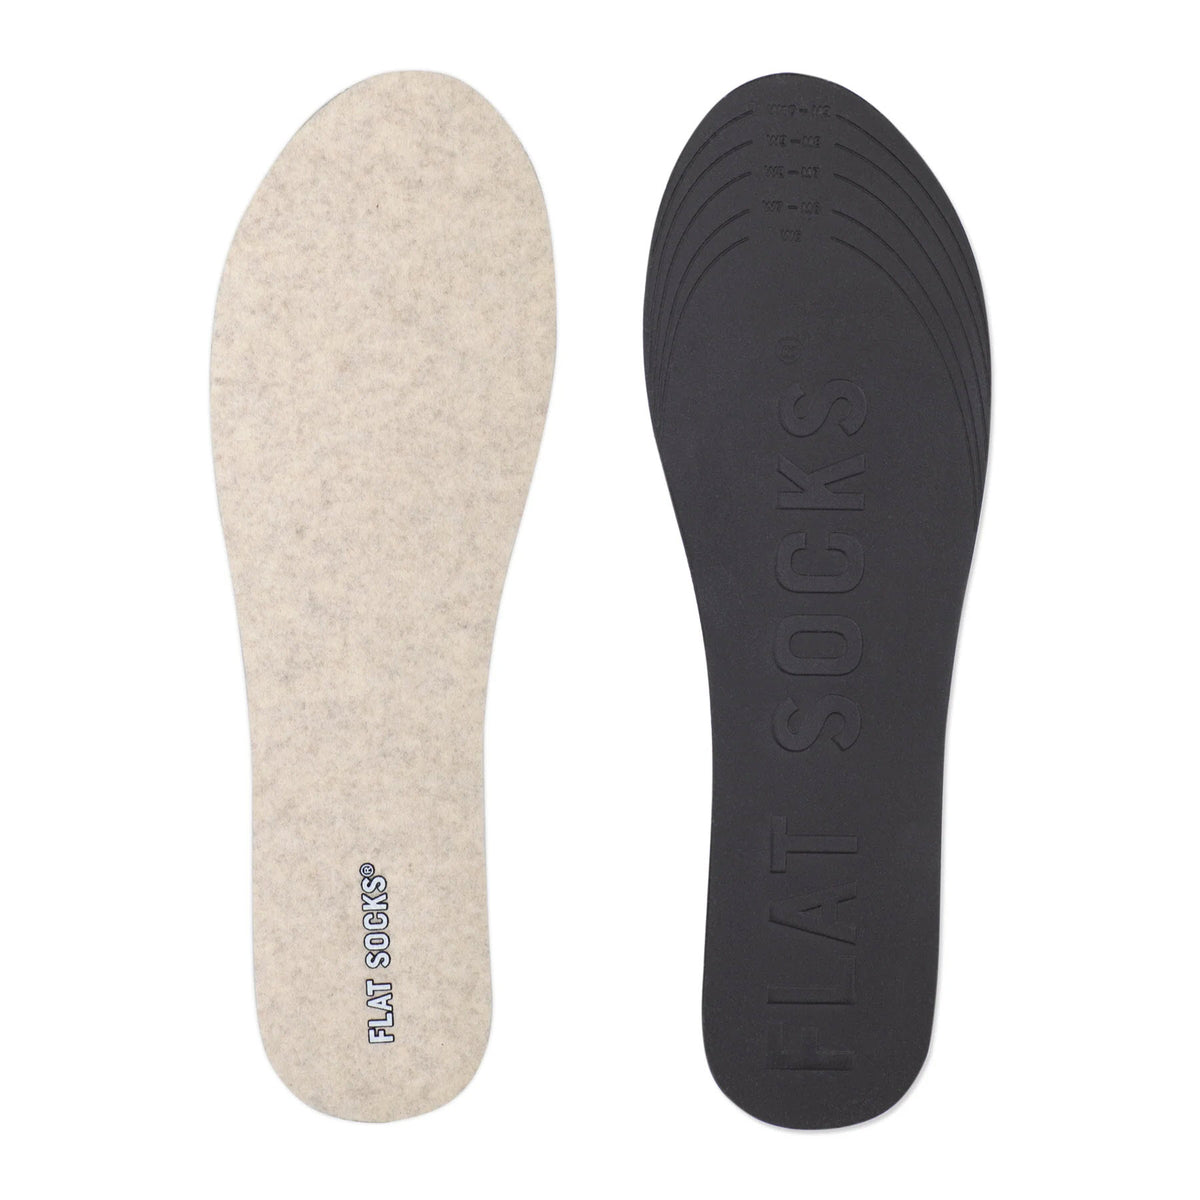 Two FLAT SOCKS SAND MICRO WOOL - WOMENS insoles laid side by side, one facing up showing a beige surface with &quot;FLAT SOCKS&quot; text, and the other facing down with a black surface.